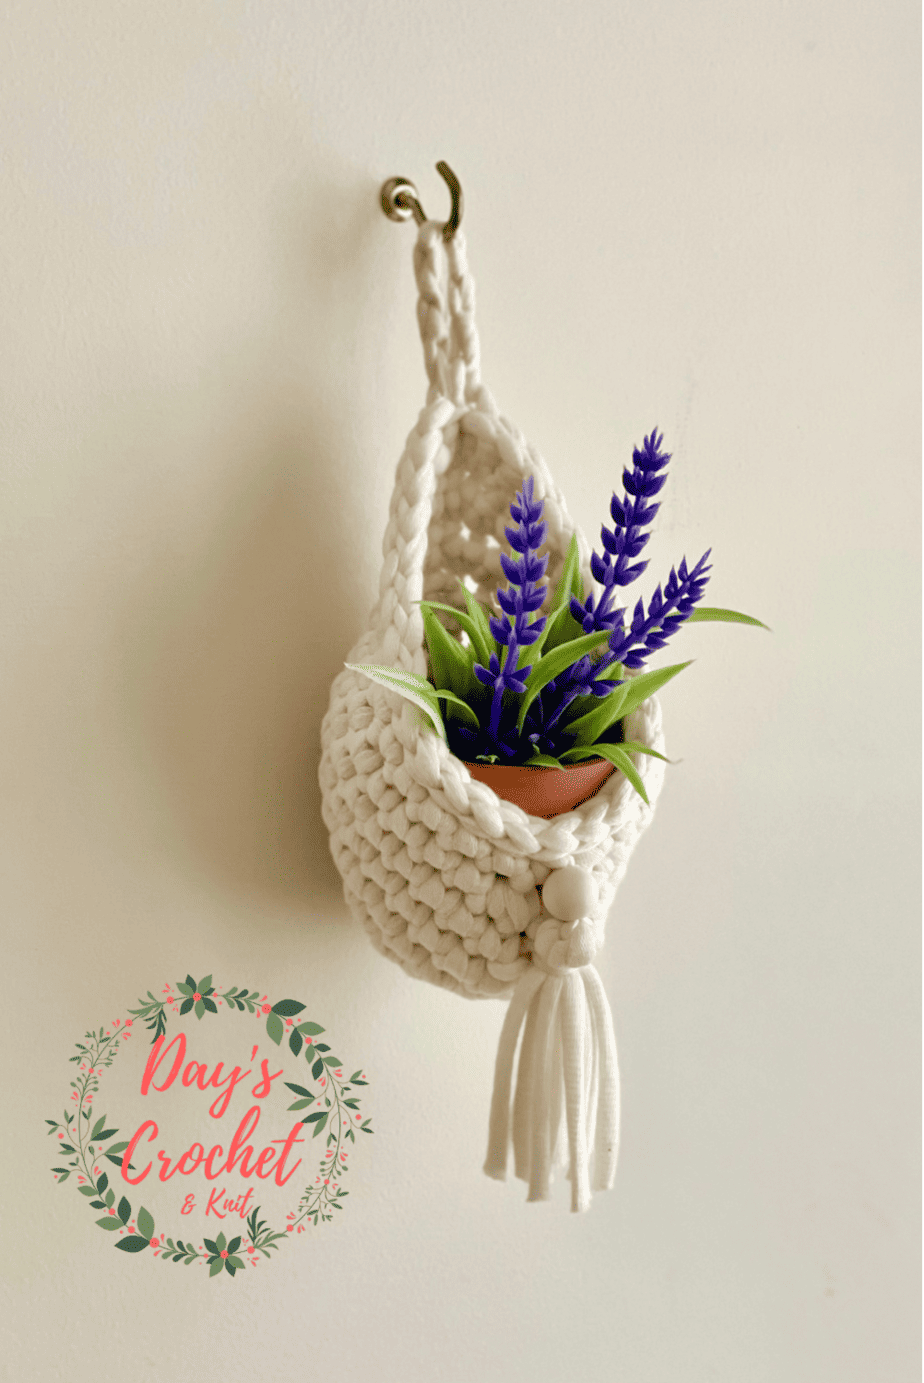 Pixie Planter by Day's Crochet